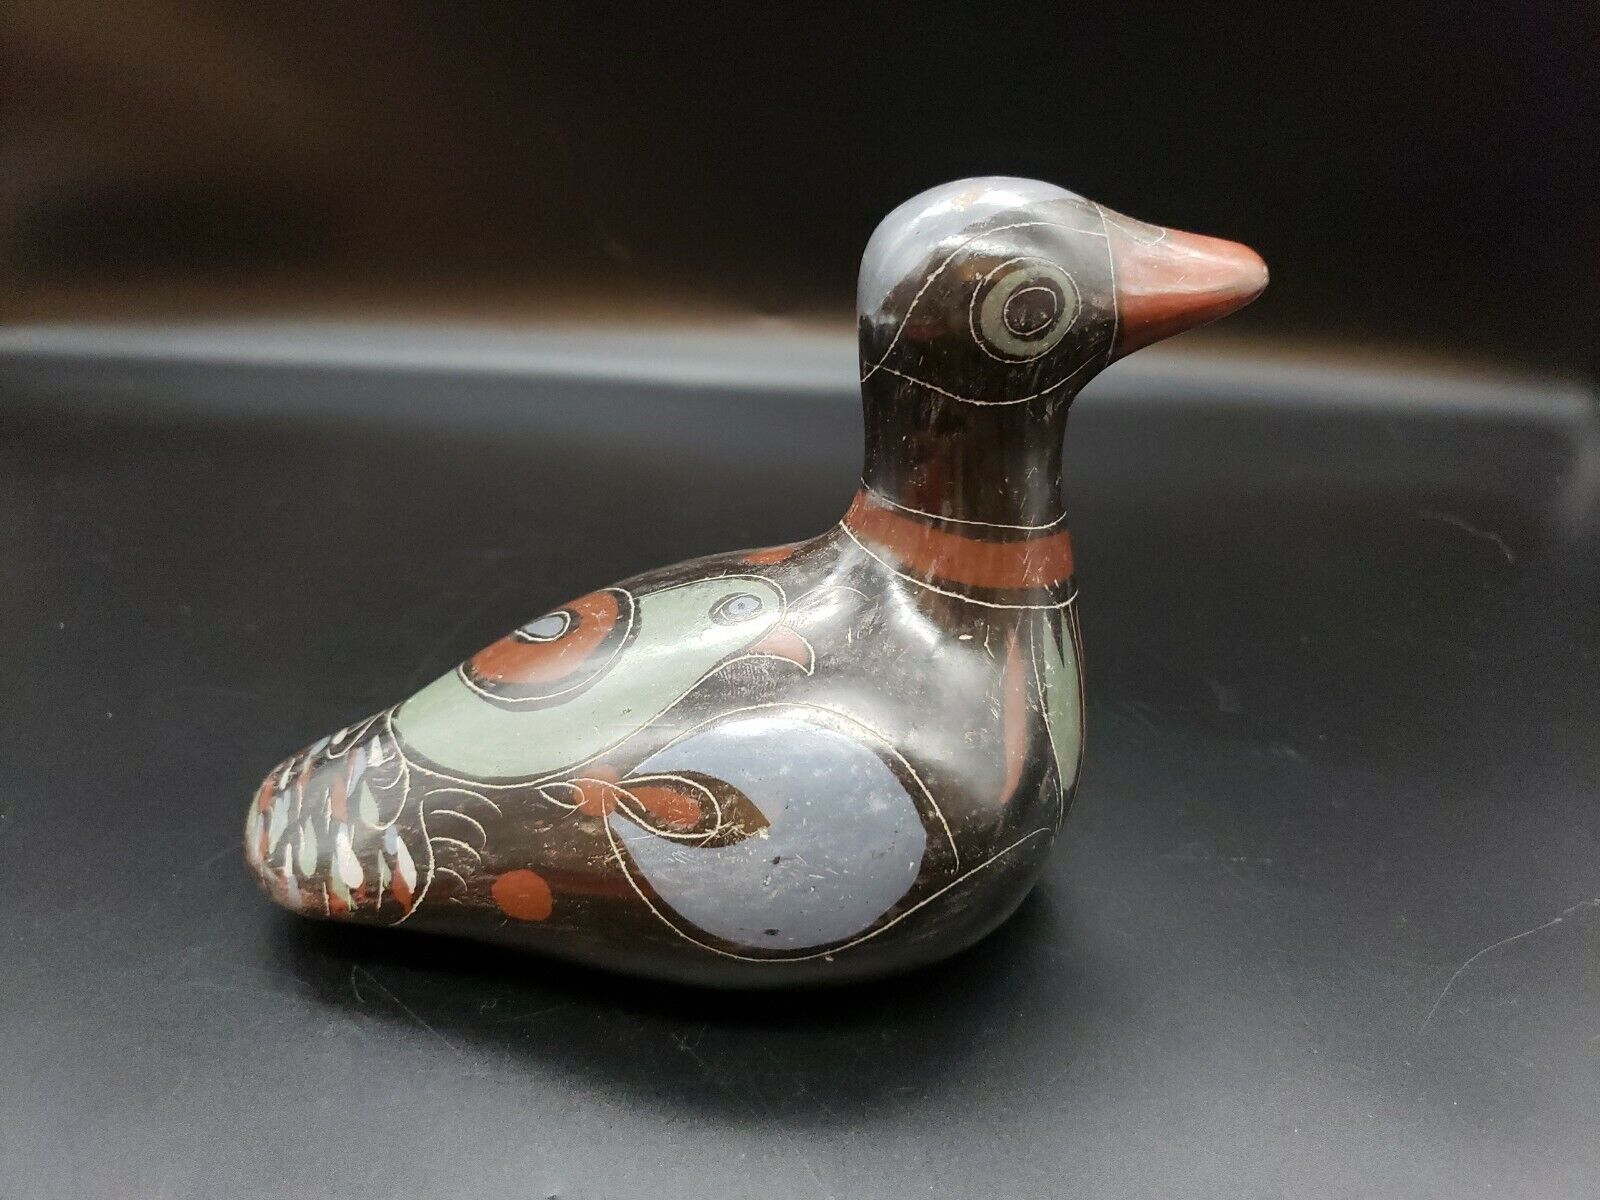 Vintage Ceramic Duck Mexico? Hand Painted/Made Folk Art Collectible